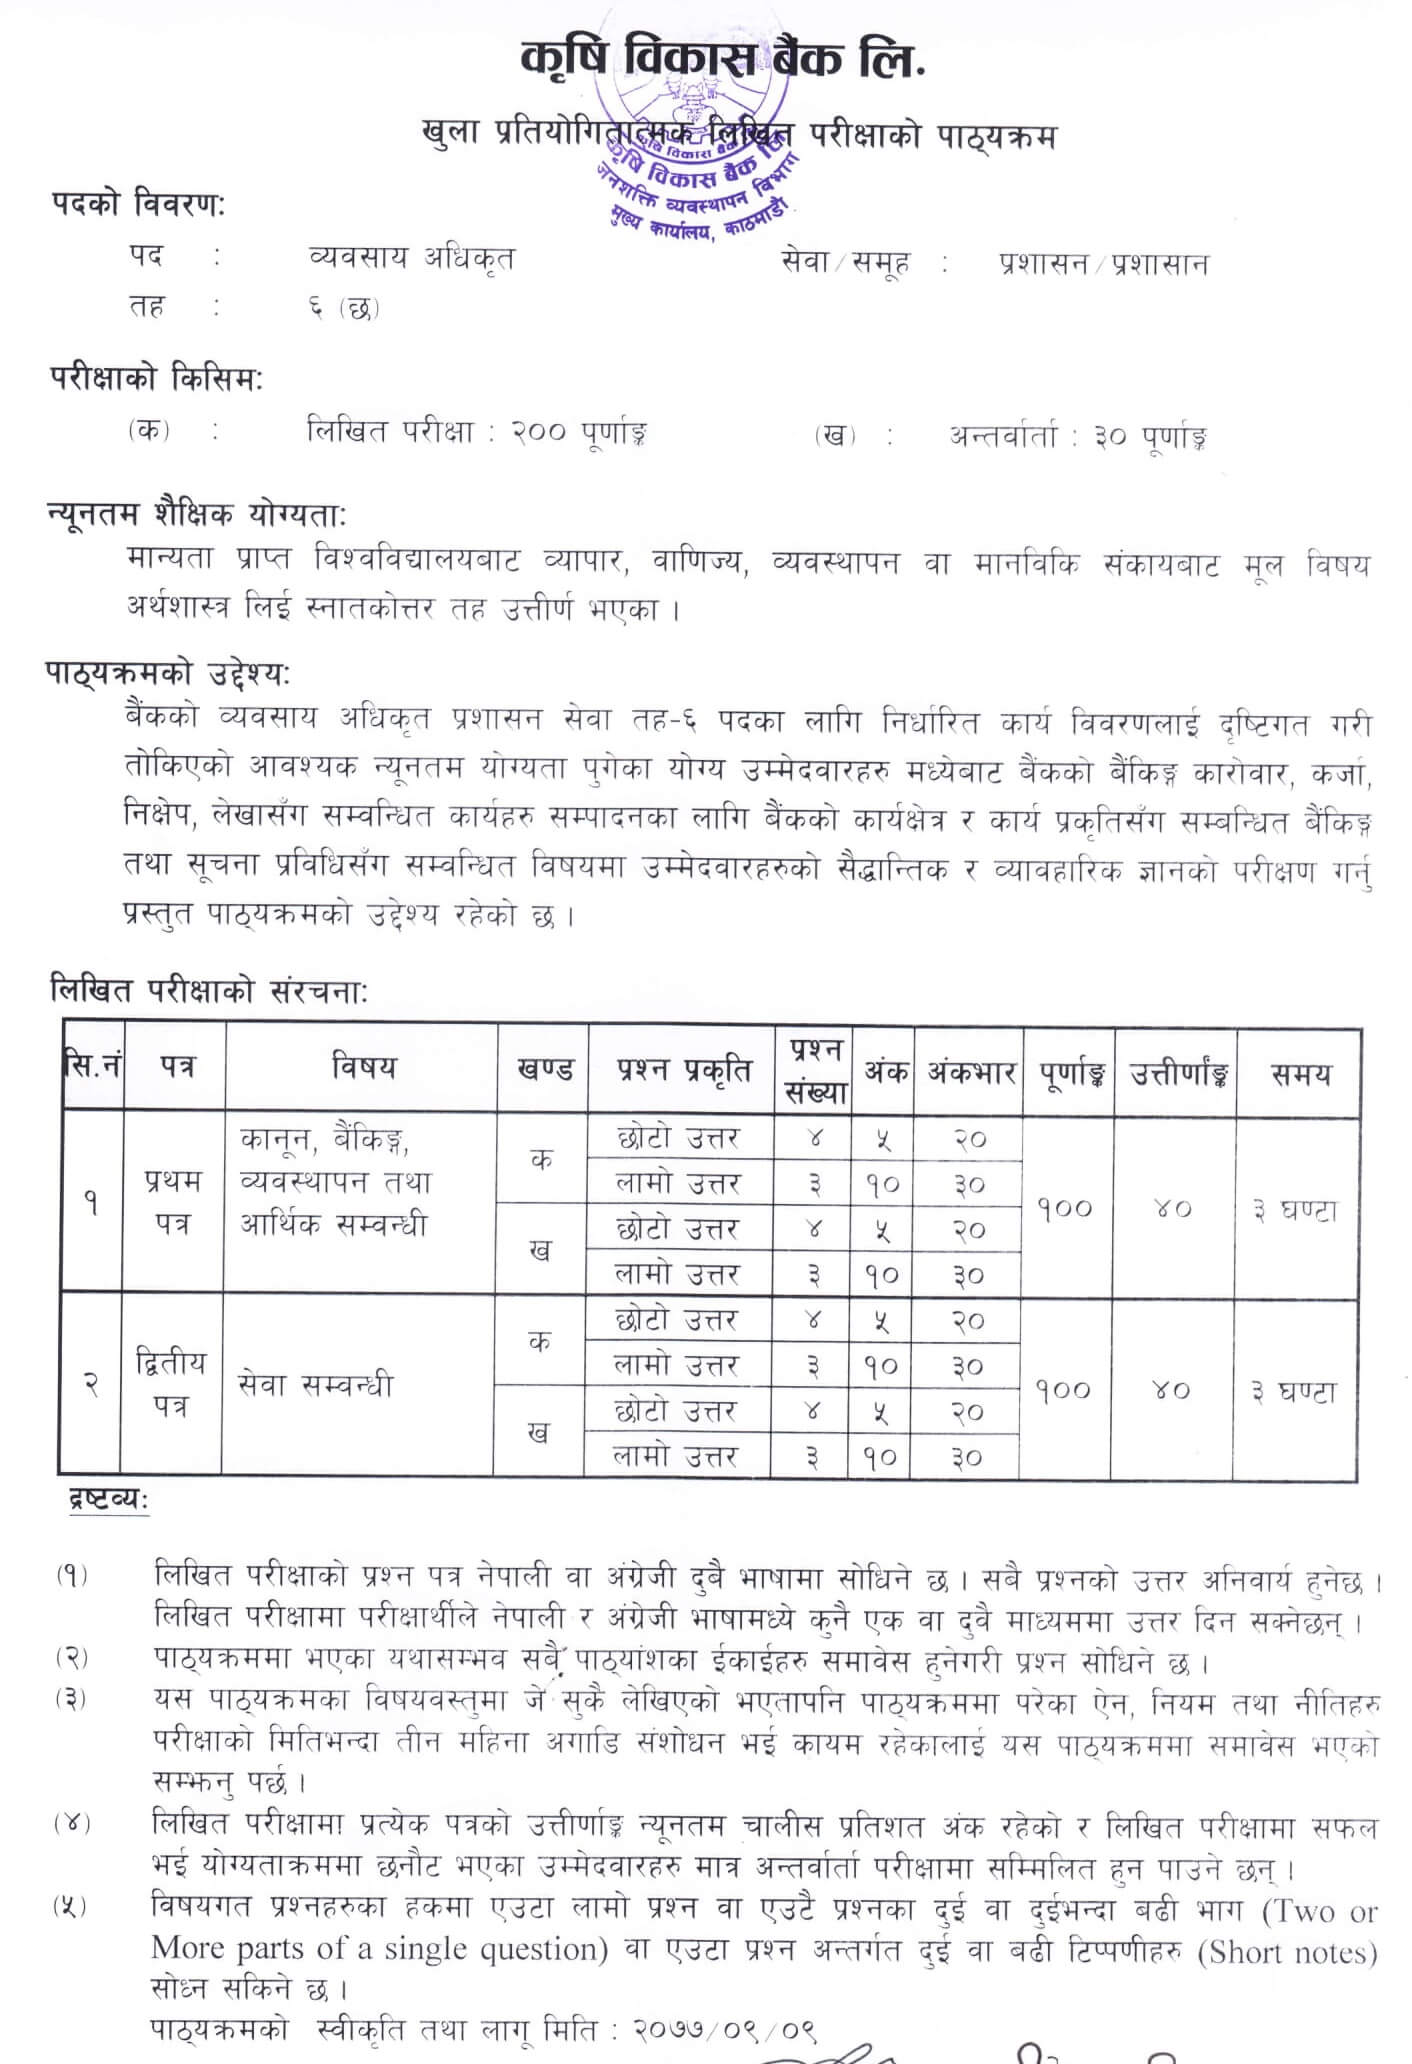 Syllabus of Agricultural Development Bank Level Business Officer